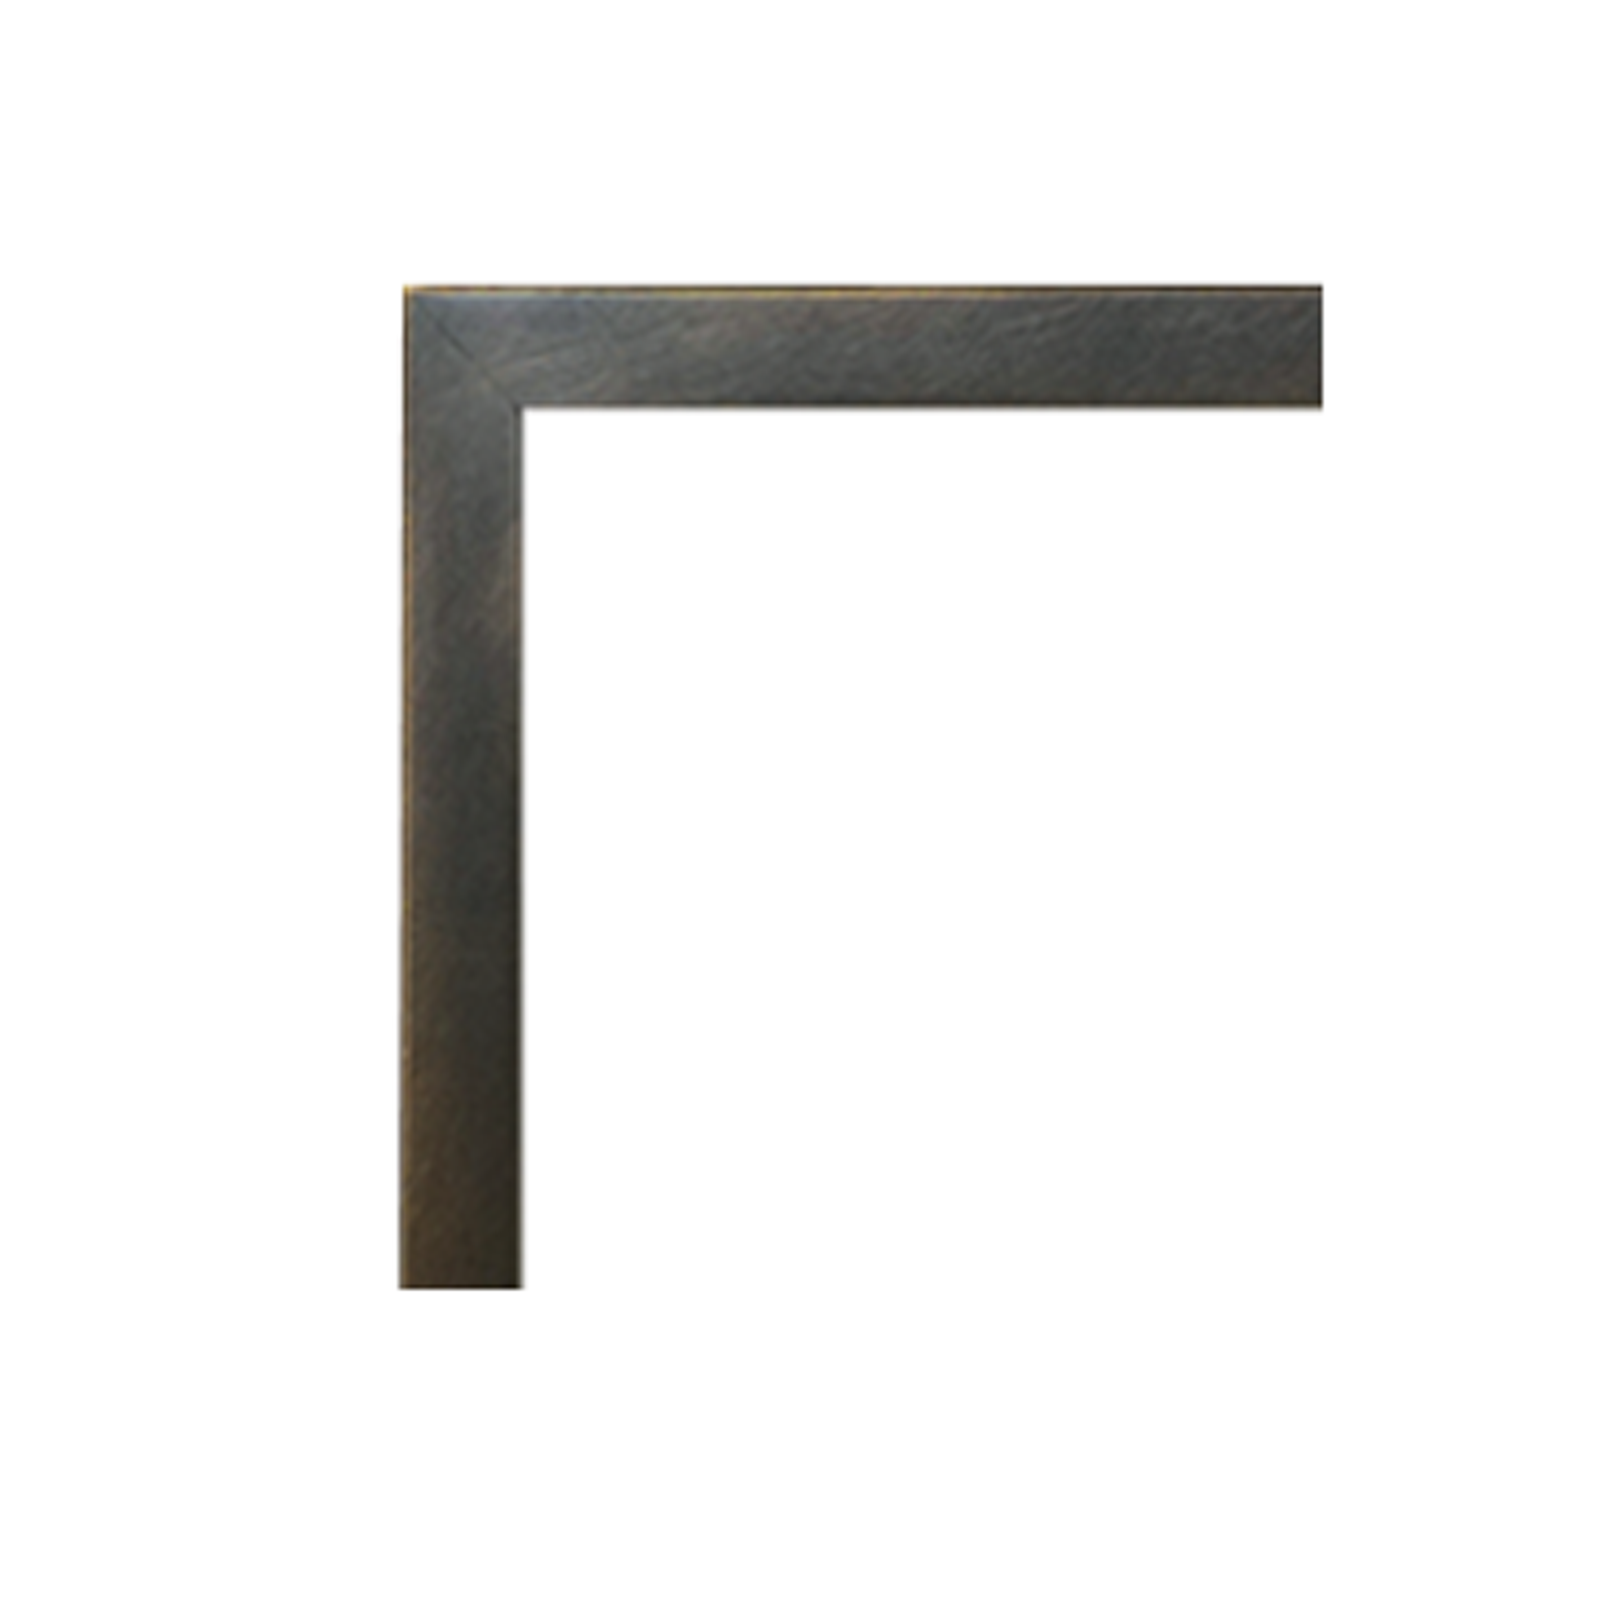 Empire 1.5-in. Oil-Rubbed Bronze Beveled Frame - DF362LBZT